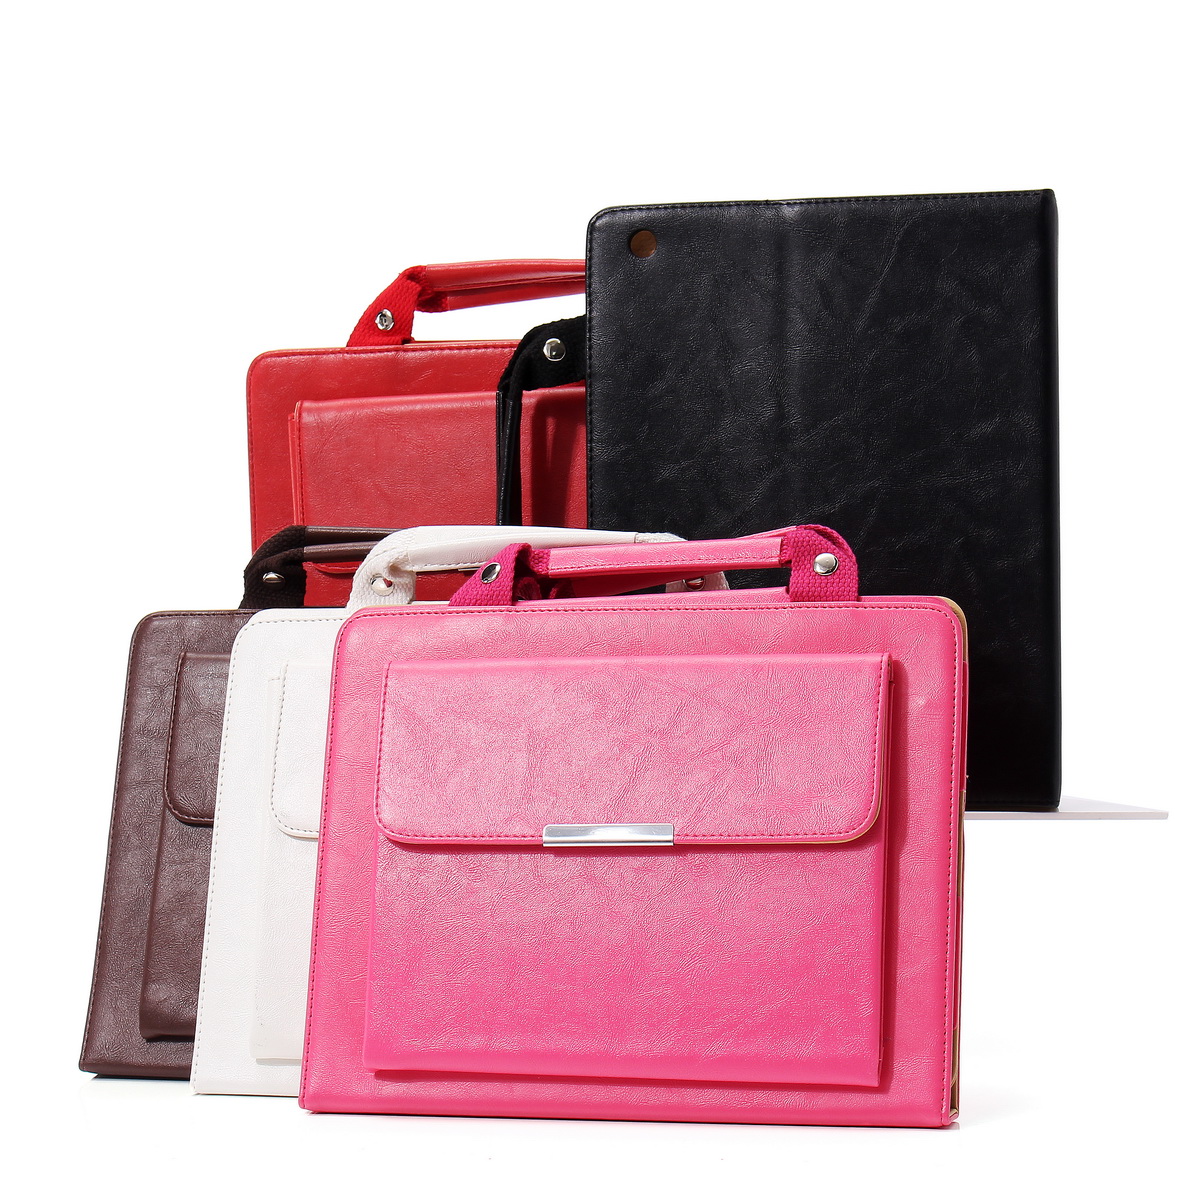 PU-Leather-Stand-Case-with-Handle-amp-Storage-Compartment-for-iPad-2-3-4---Perfect-for-Travel-1141745